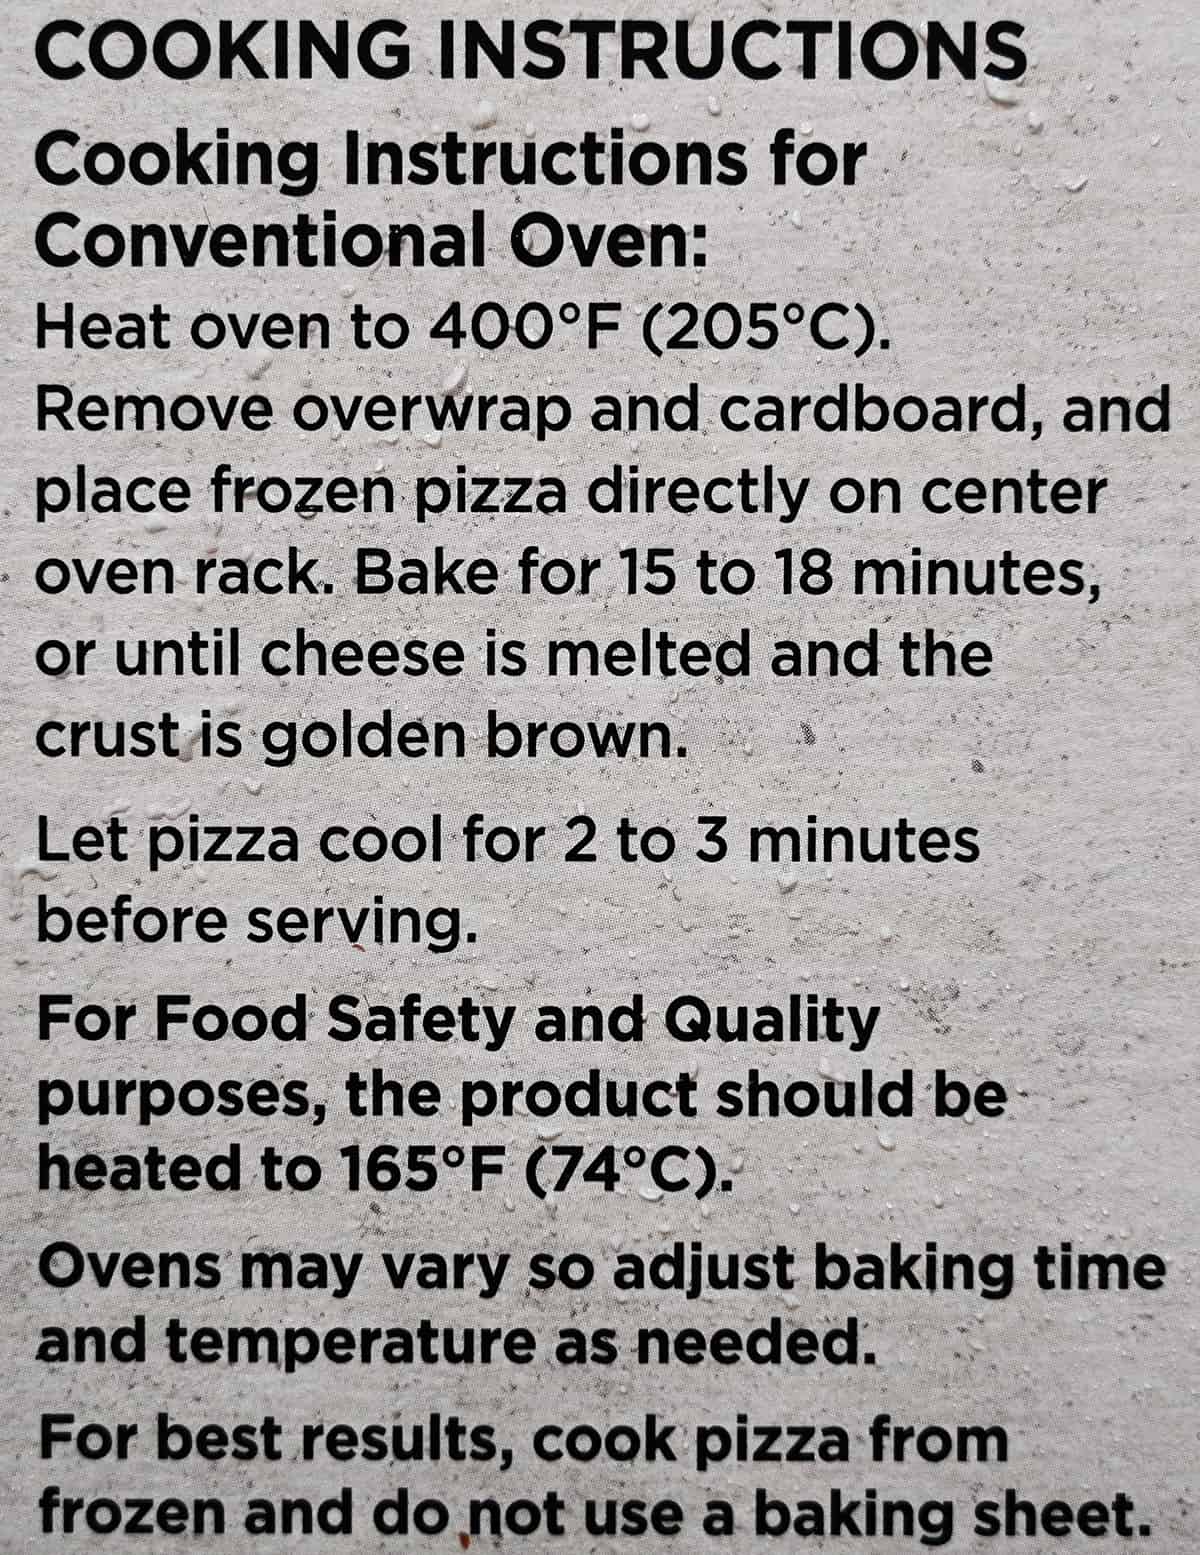 Image of the cooking instructions for the pizza from the back of the box.